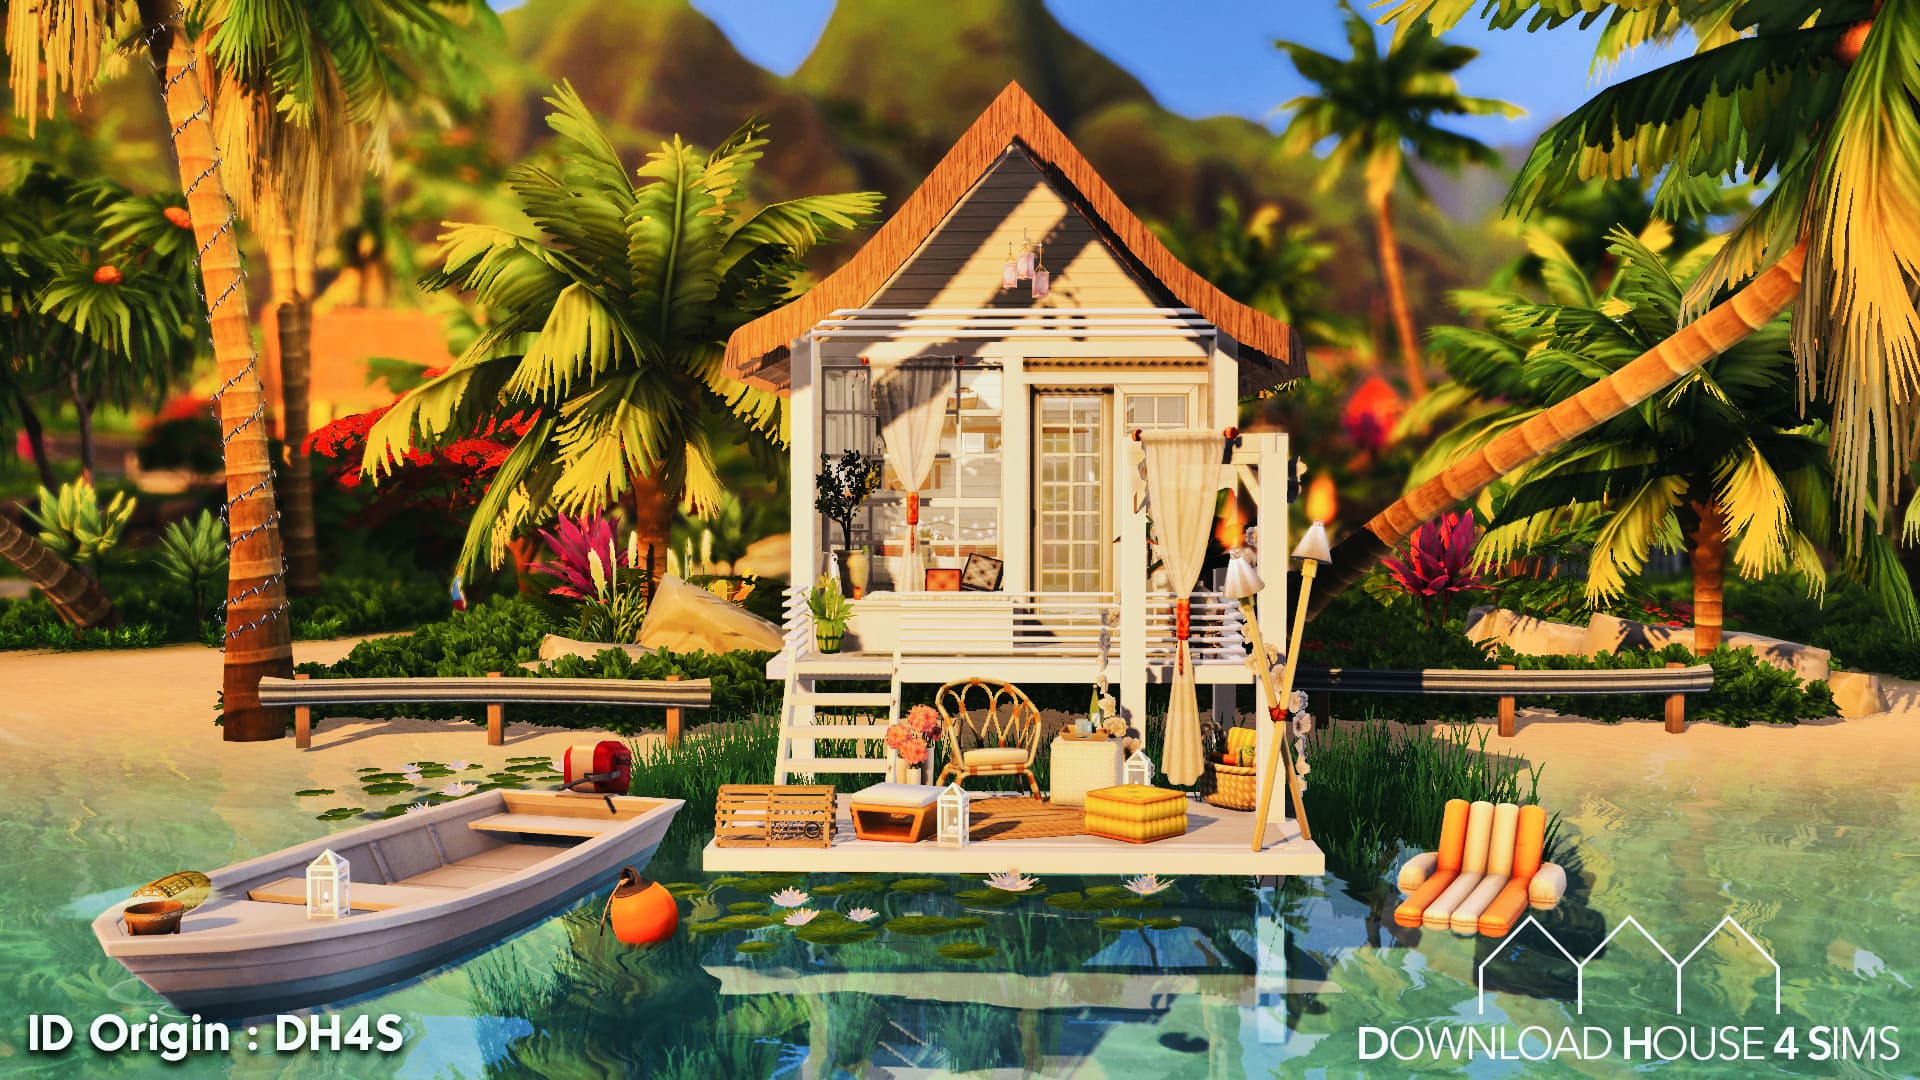 Download-House-4-sims-Tiny-beach-cabin-house-1